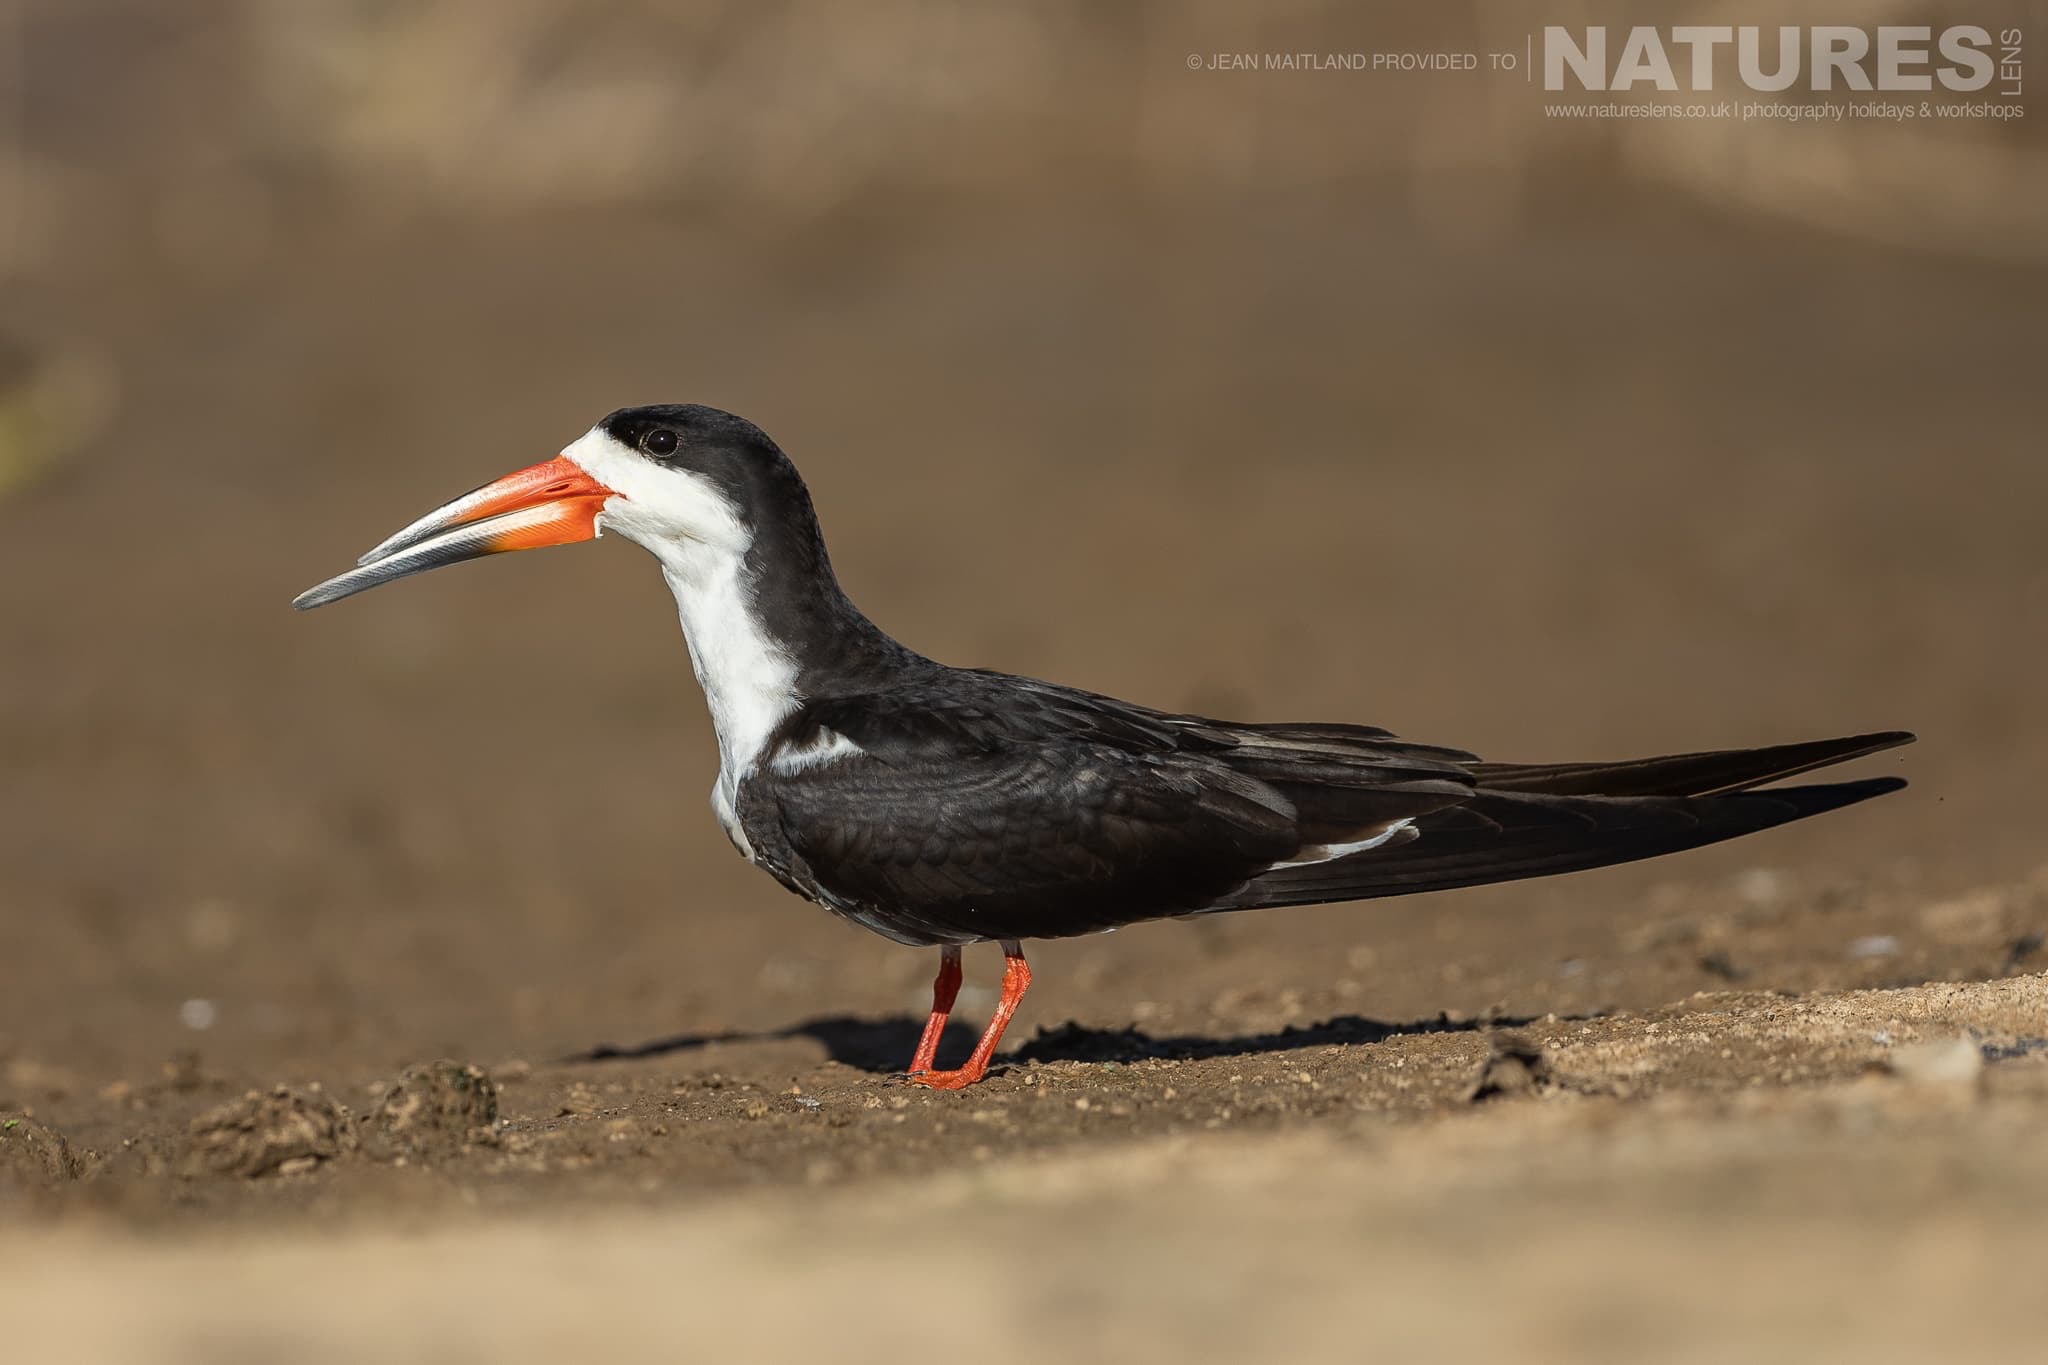 A Black Skimmer On The Banks Of The Pantanal River During The Natureslens Jaguars Of The Pantanal Photography Holiday